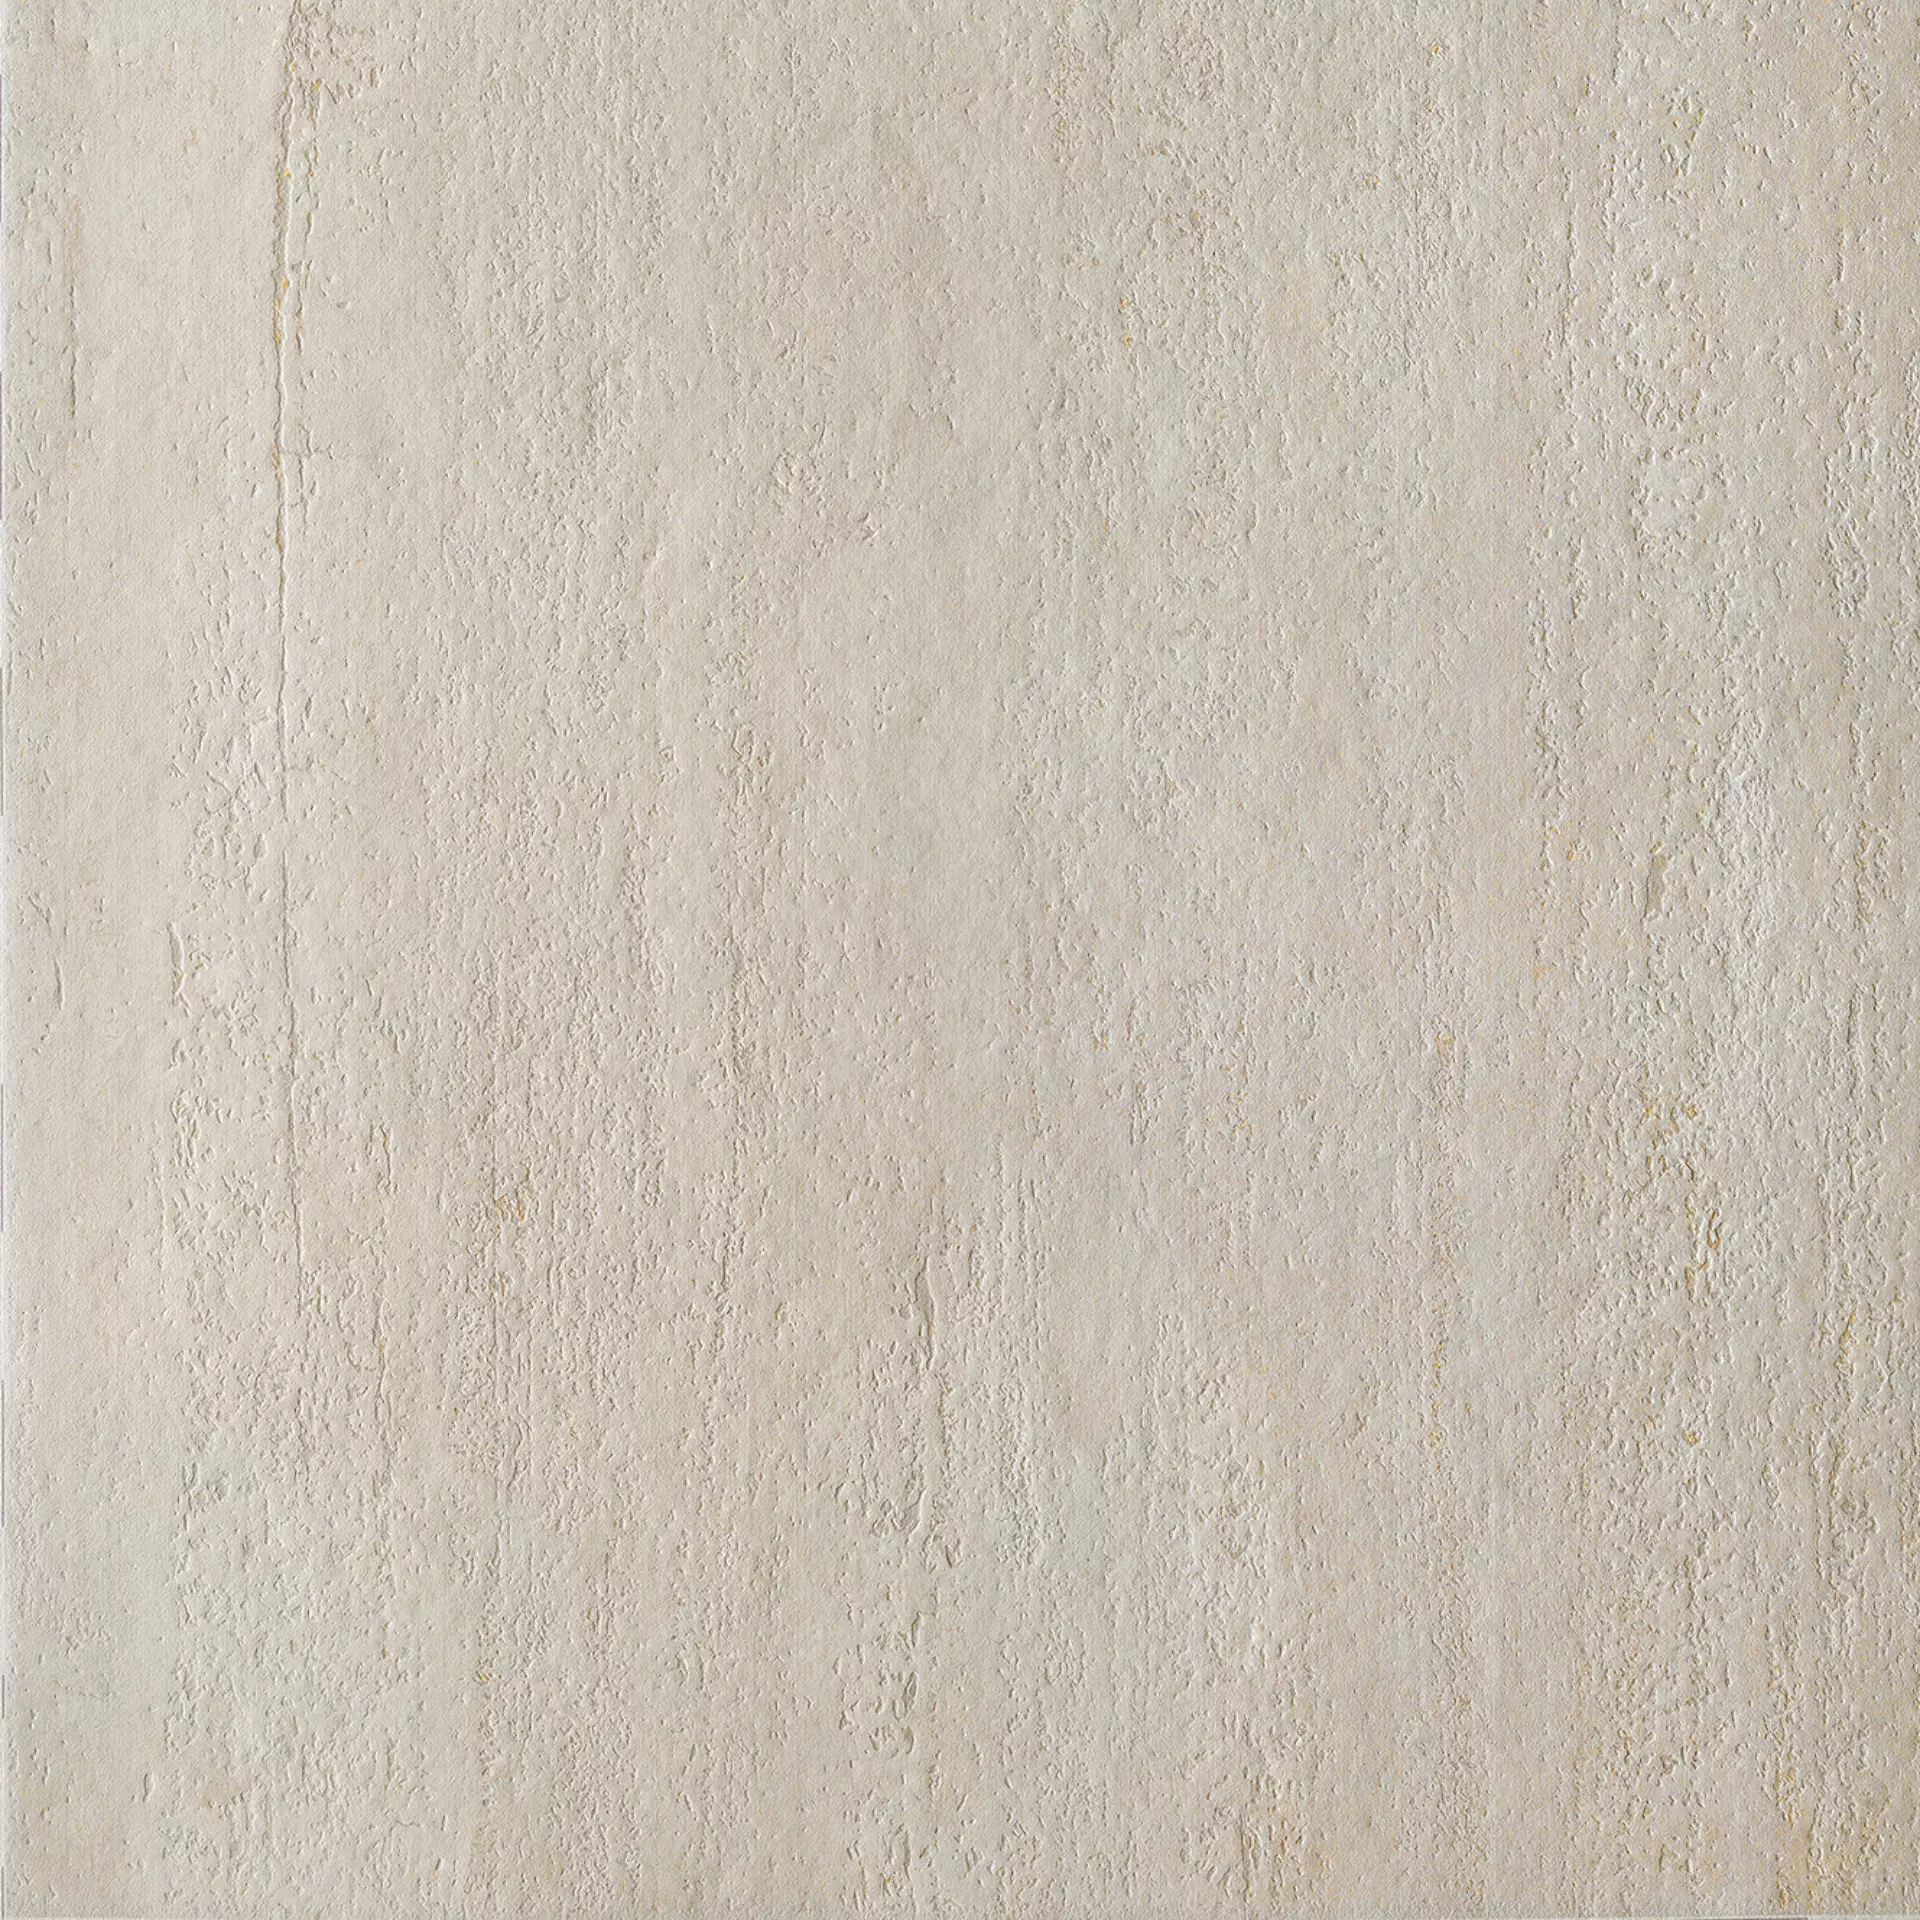 Del Conca Hse Stone Edition Dinamik Travertino Hse Naturale GRSE10R 120x120cm rectified 8,5mm